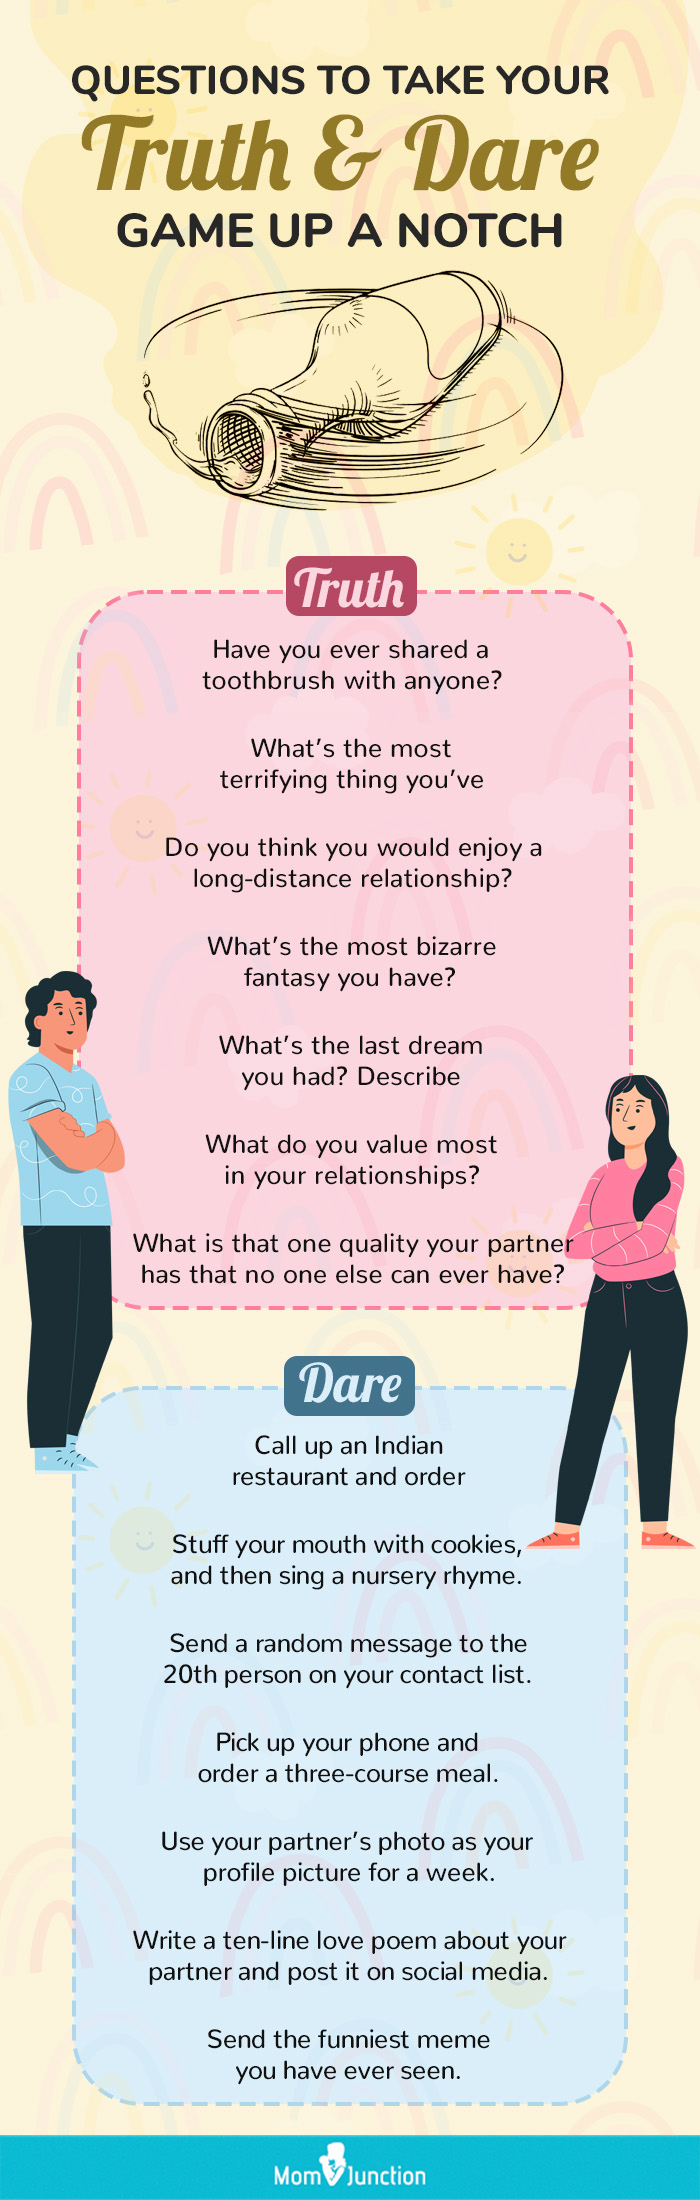 Let's Get Deep - Questions for Couples Intimate Date Night Card Game